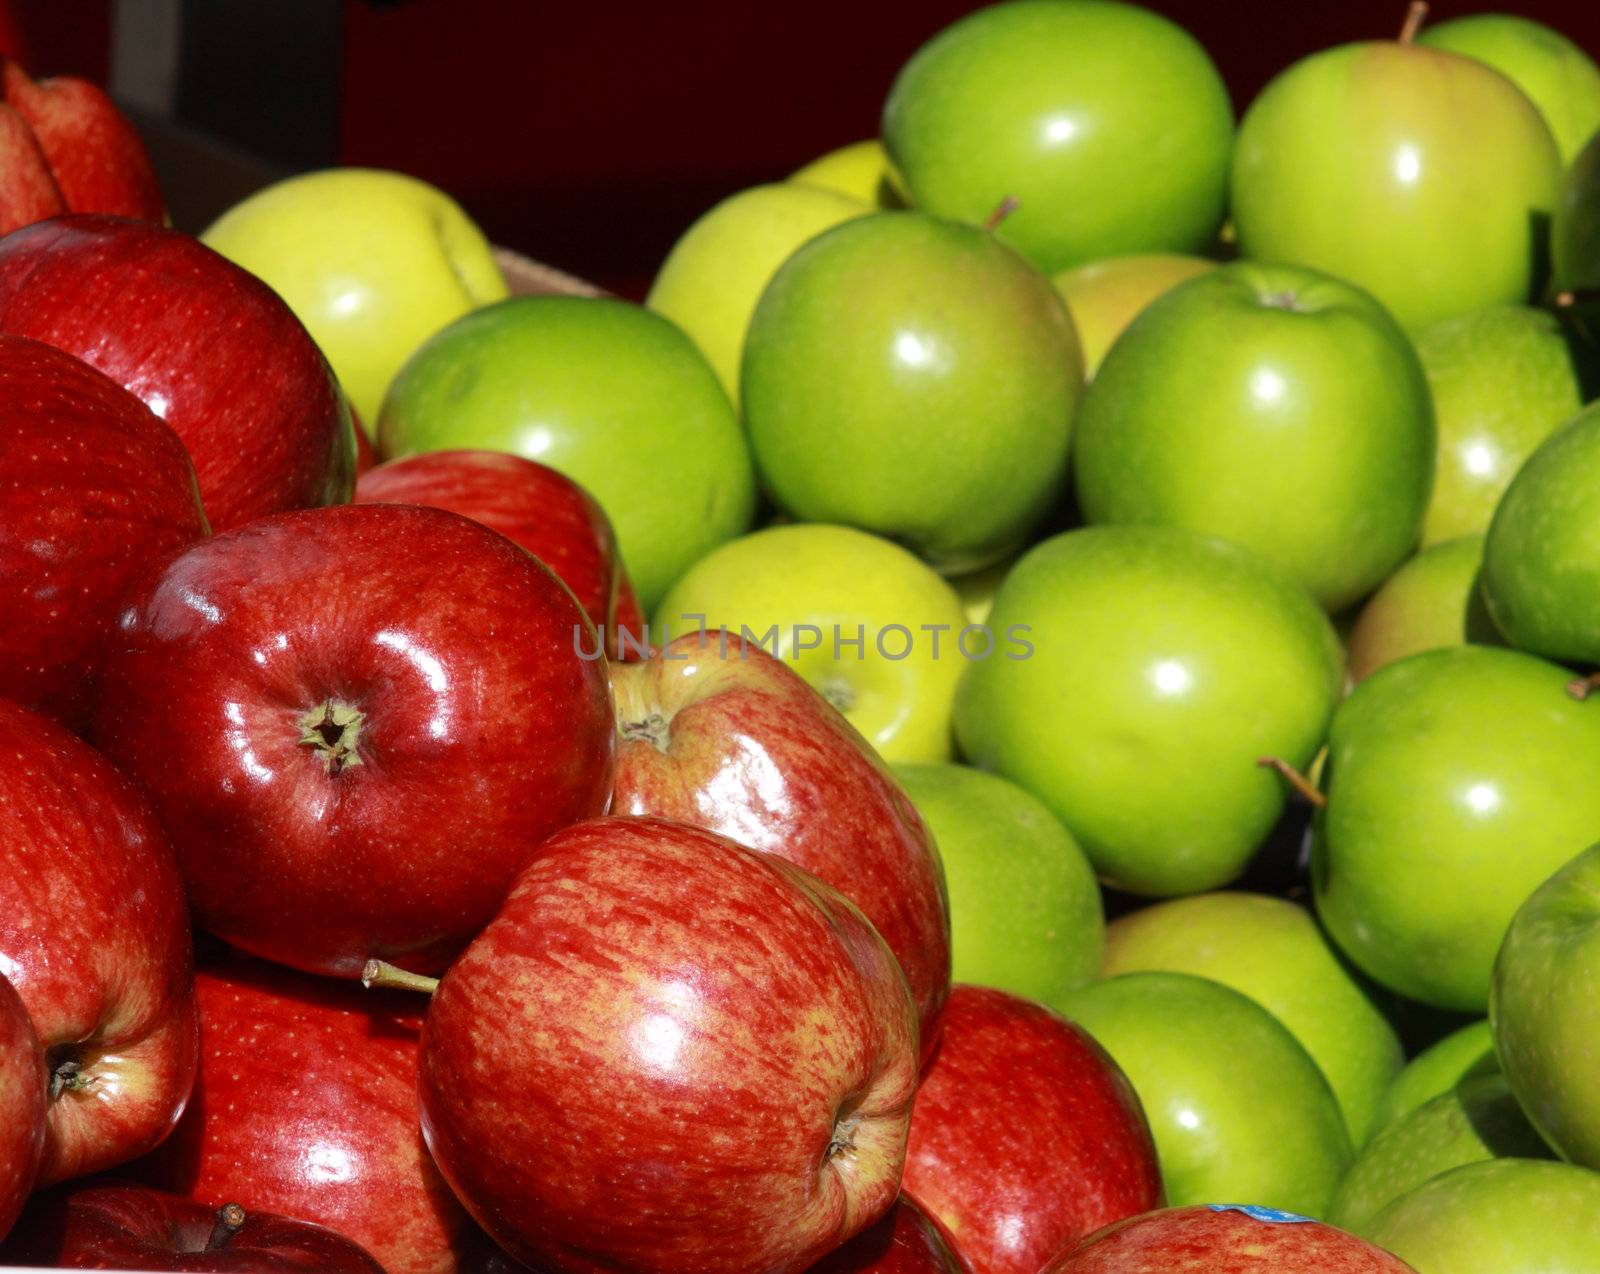 fresh juicy red and green apples on the market